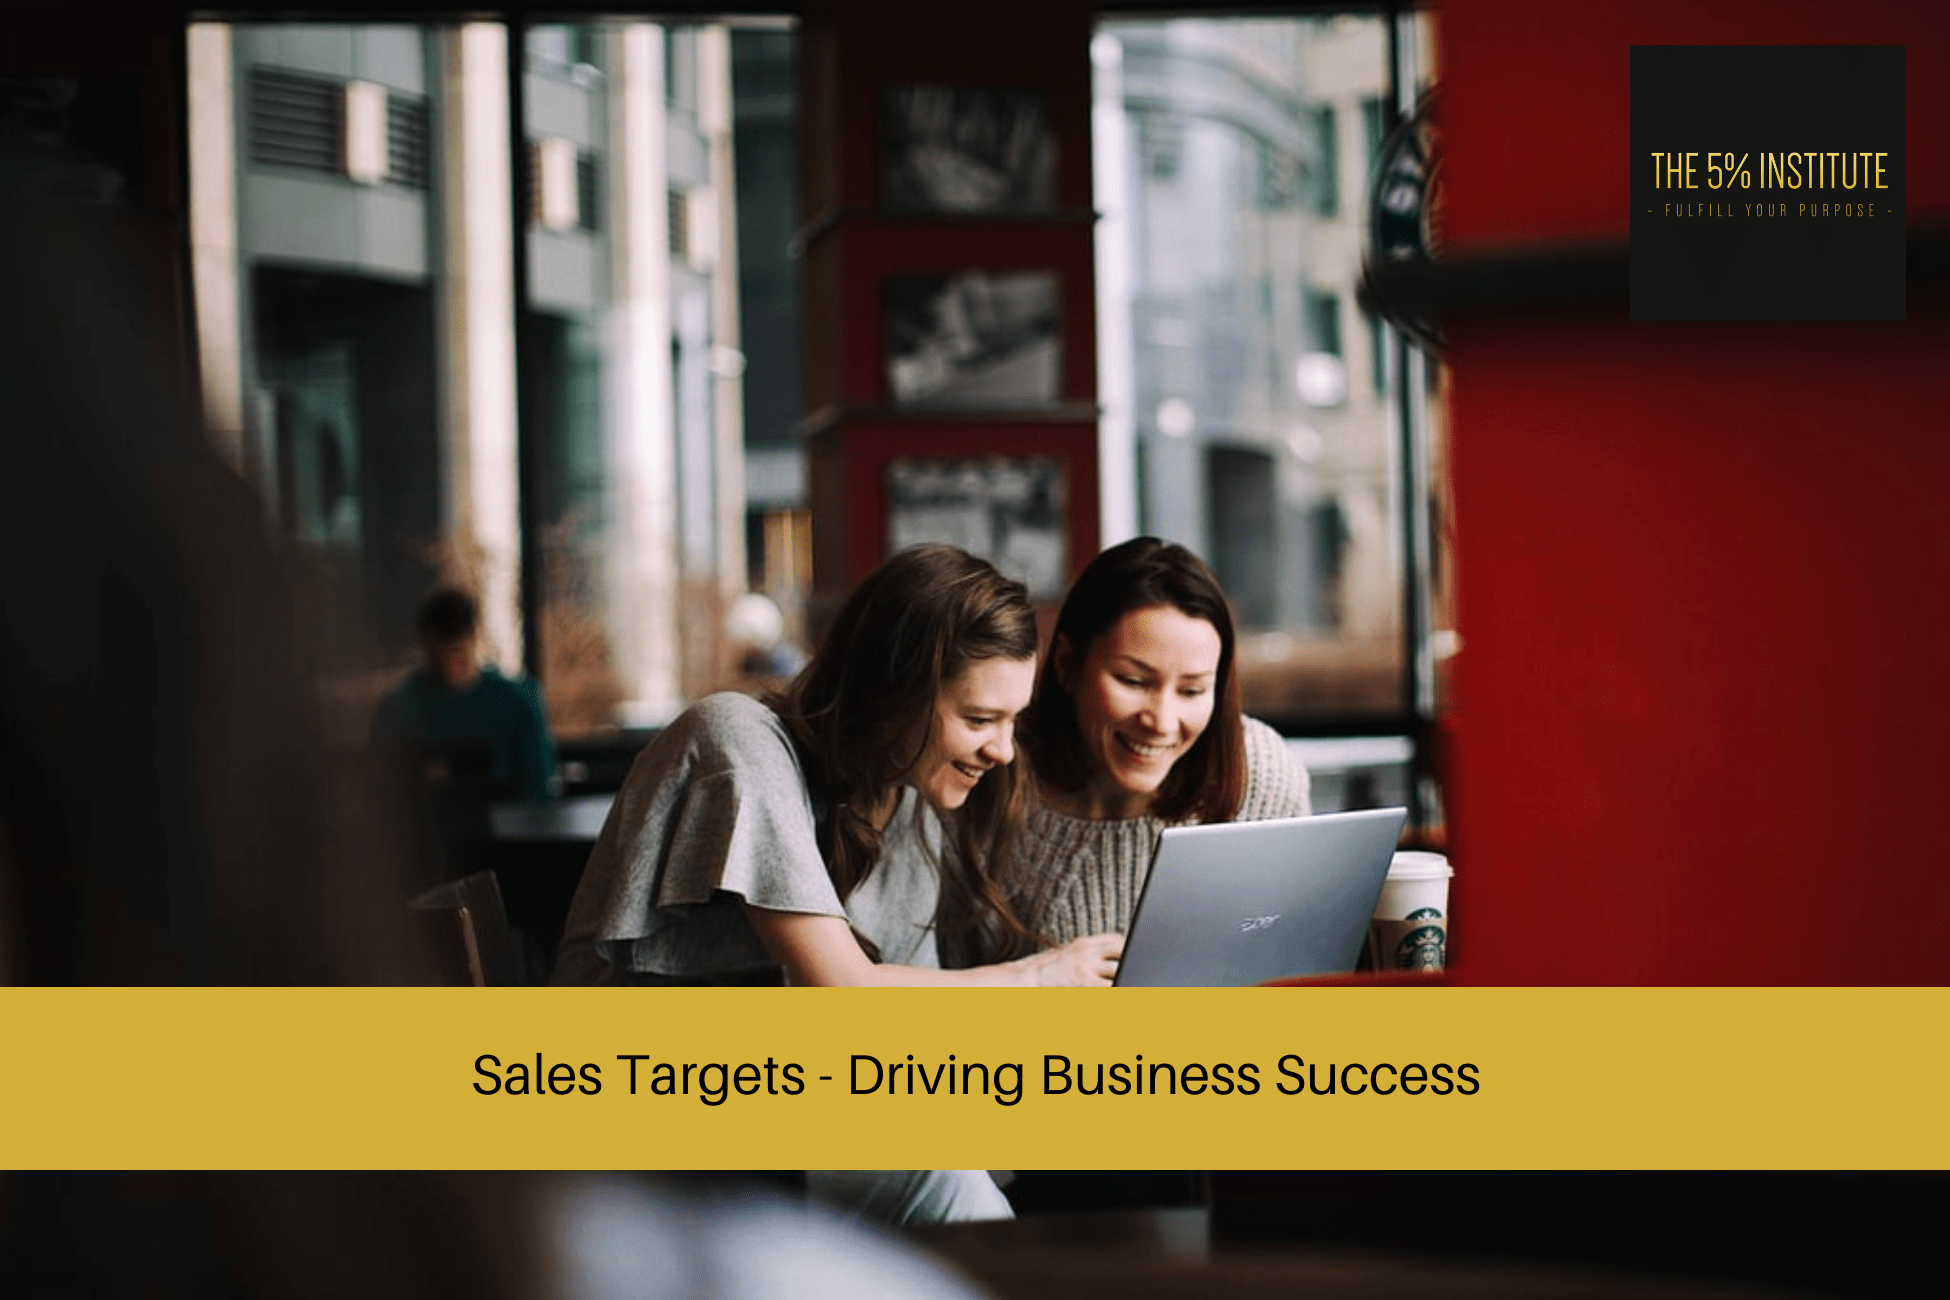 Sales Targets - Driving Business Success